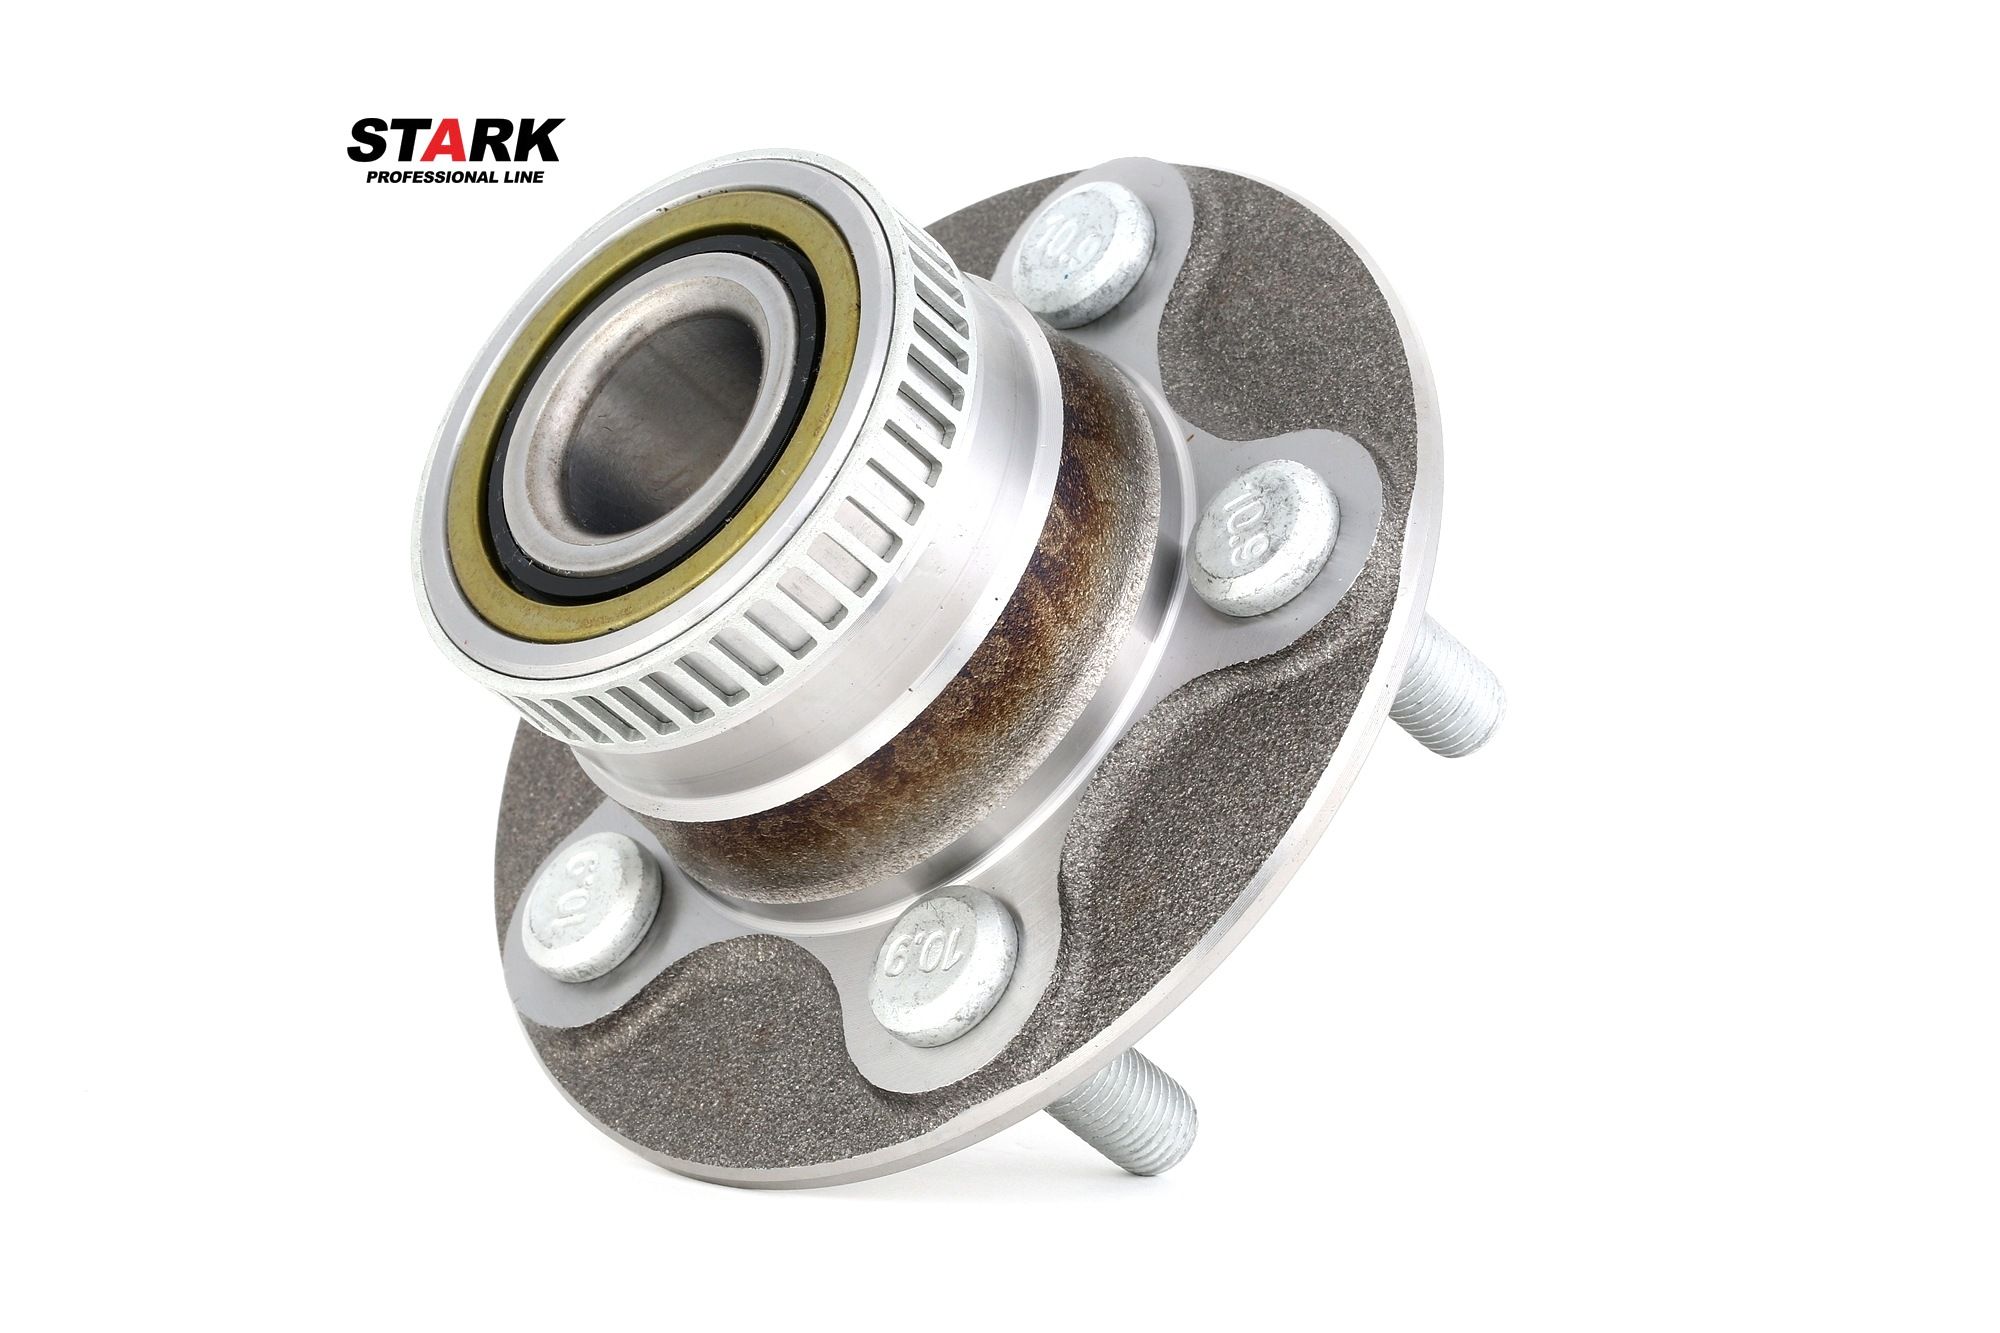 SKWB-0180384 STARK Wheel hub assembly CHRYSLER Rear Axle both sides, with ABS sensor ring